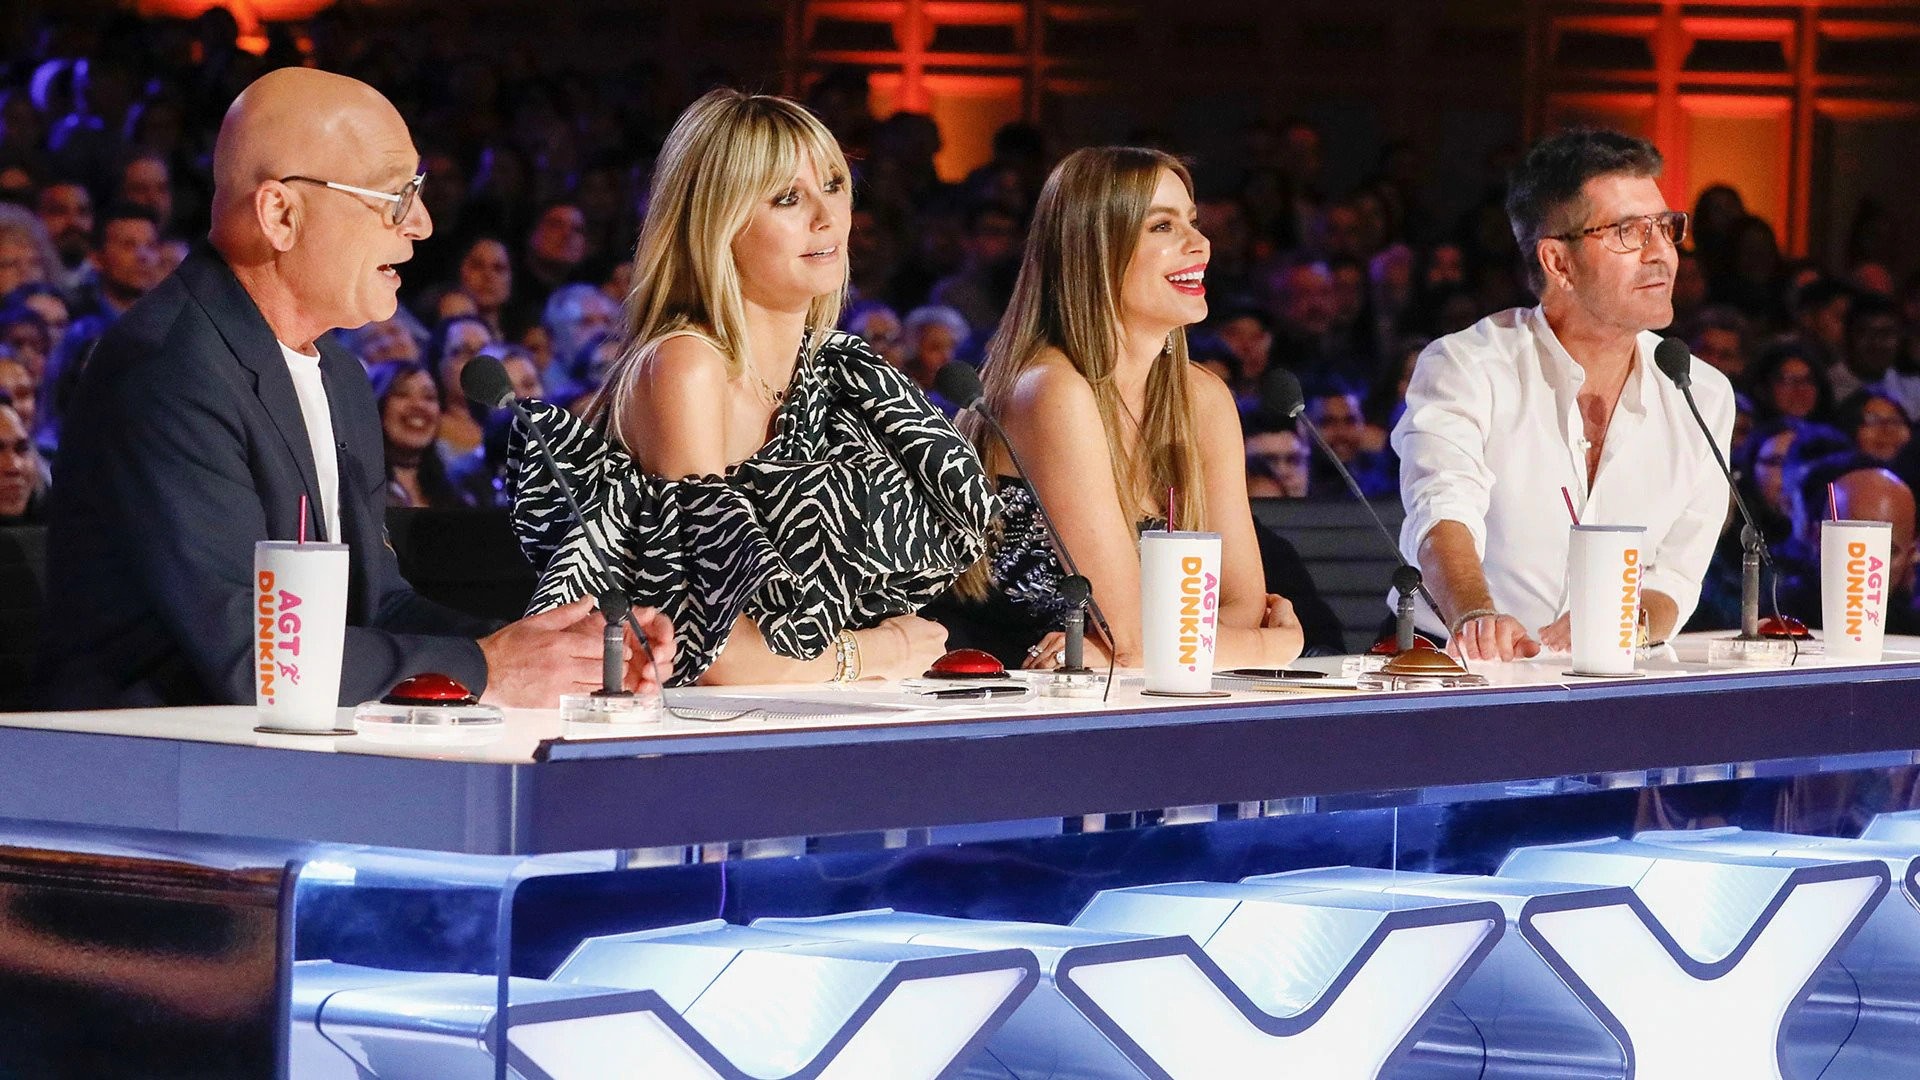 American got talent threesome mother died form cancer